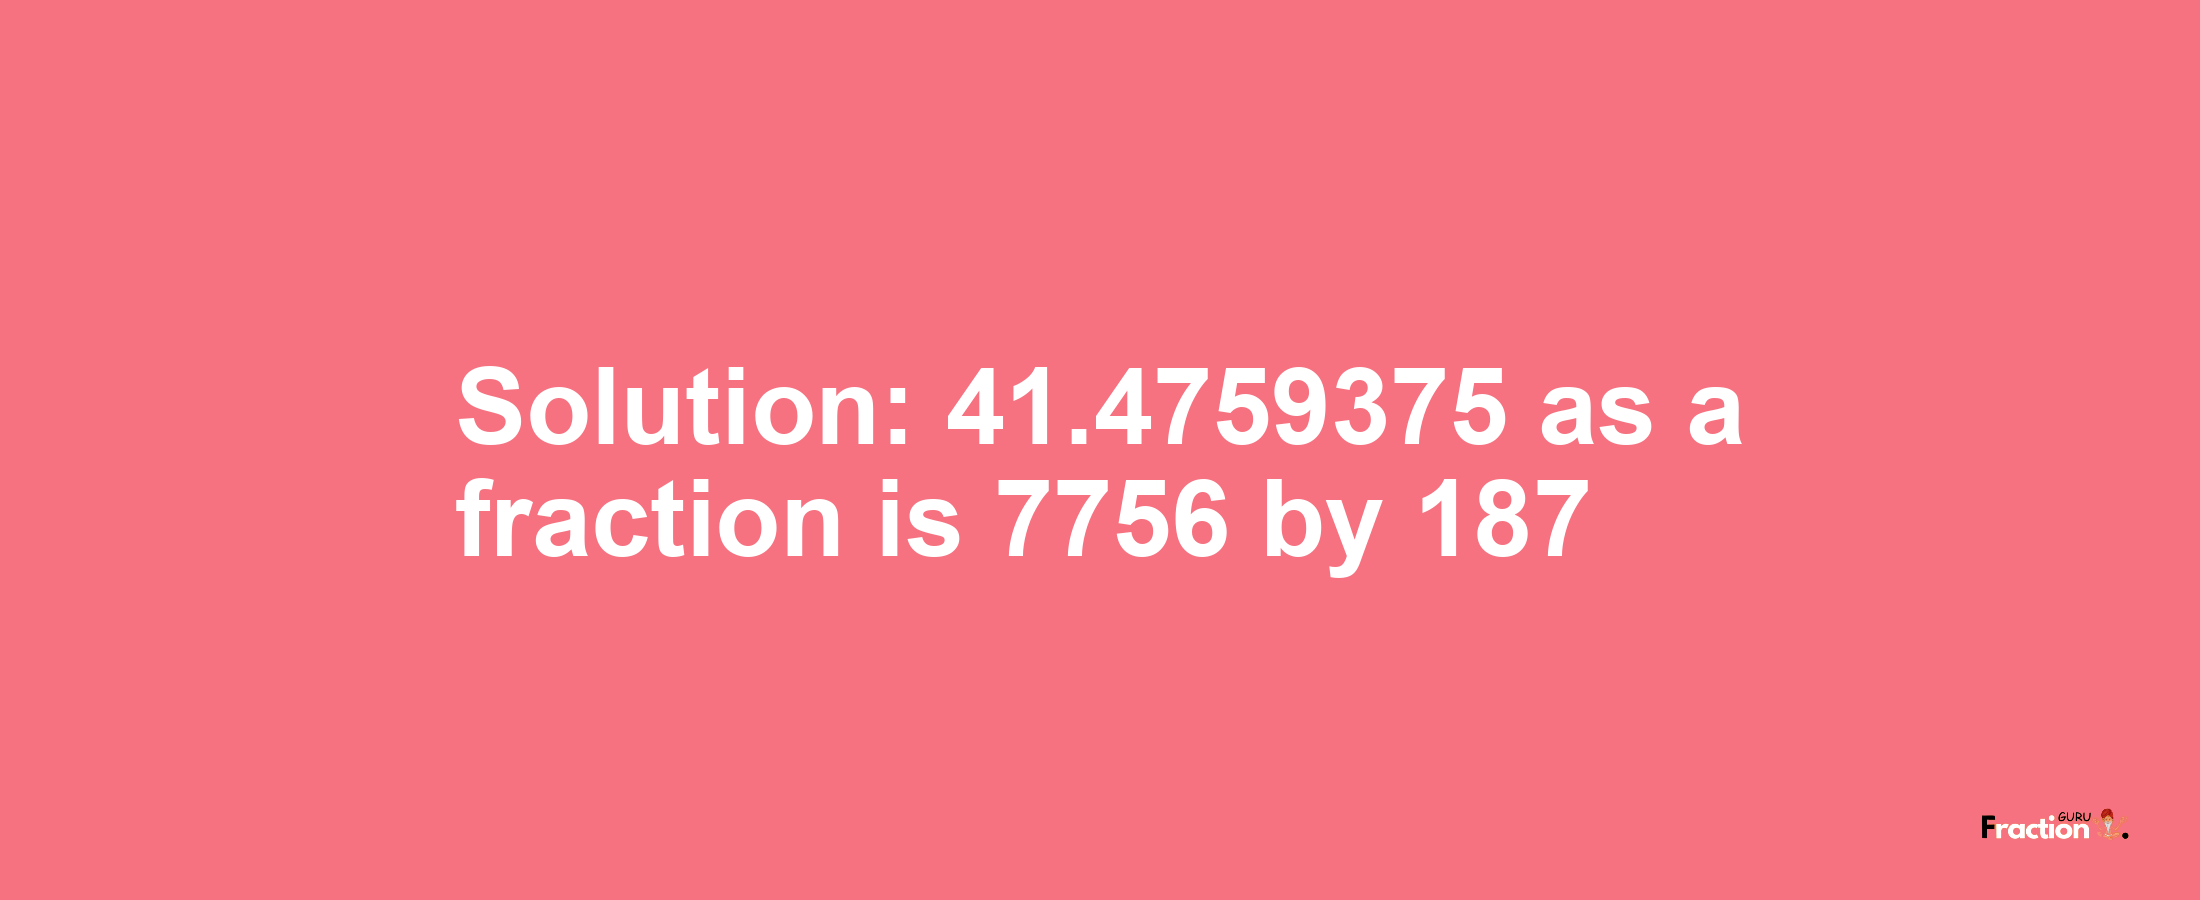 Solution:41.4759375 as a fraction is 7756/187